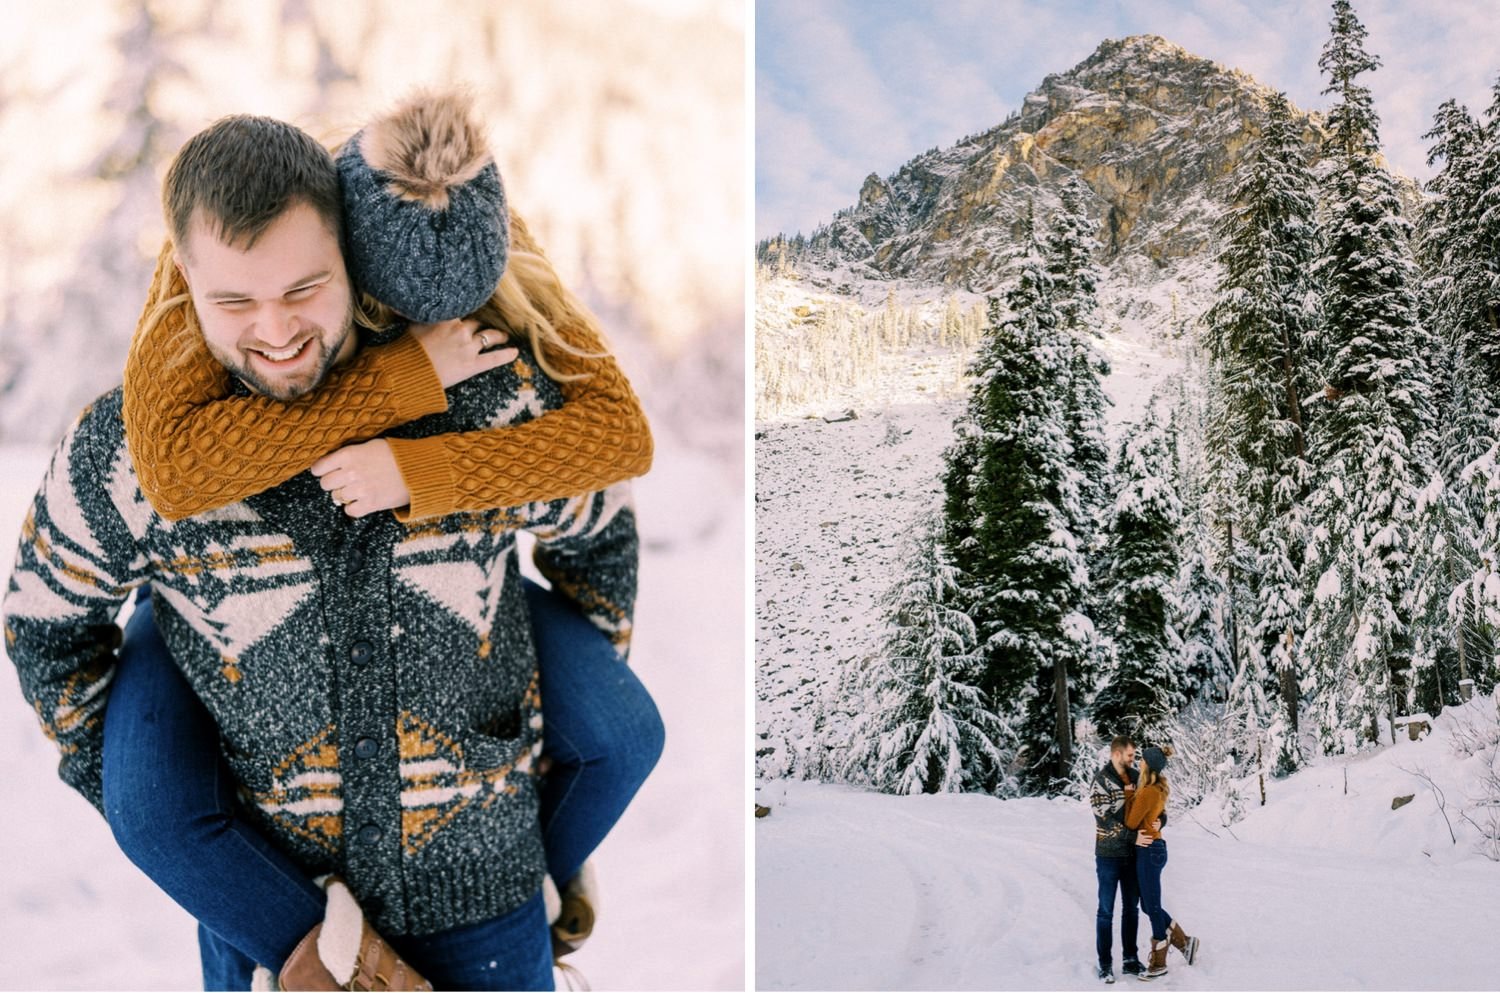 10_Snowy engagement photos at Snoqualmie Pass near Seattle, with a film-like style by Ryan Flynn Photography.jpg